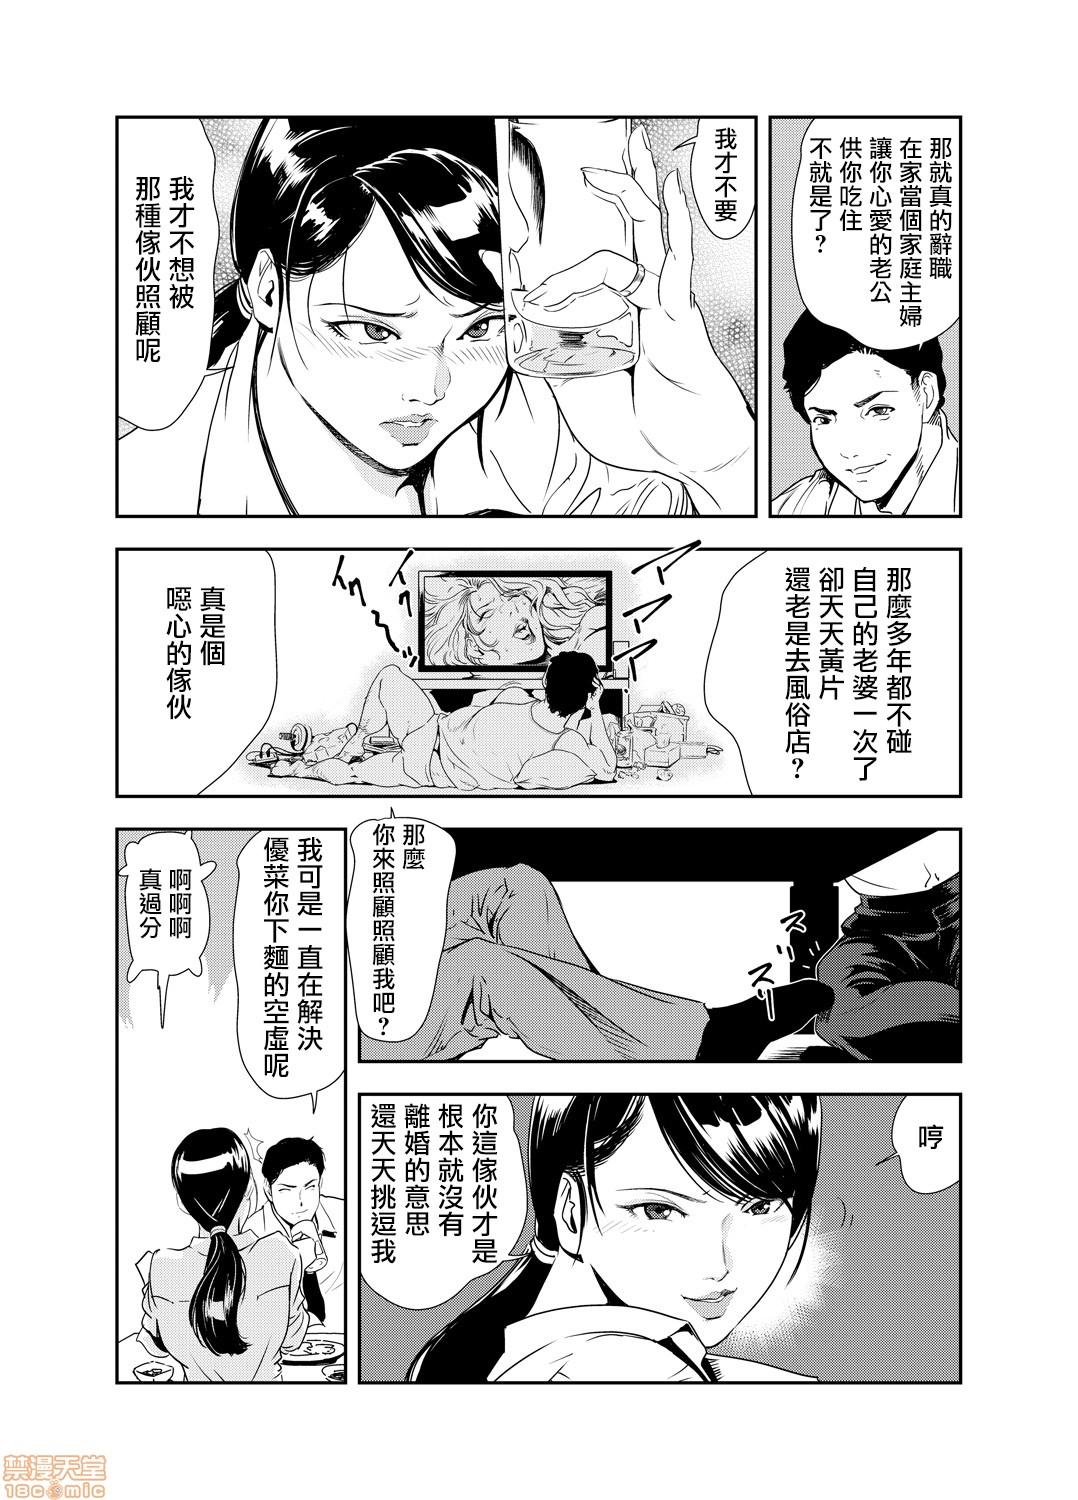 Deflowered Chikan Express 16 Gym - Page 4